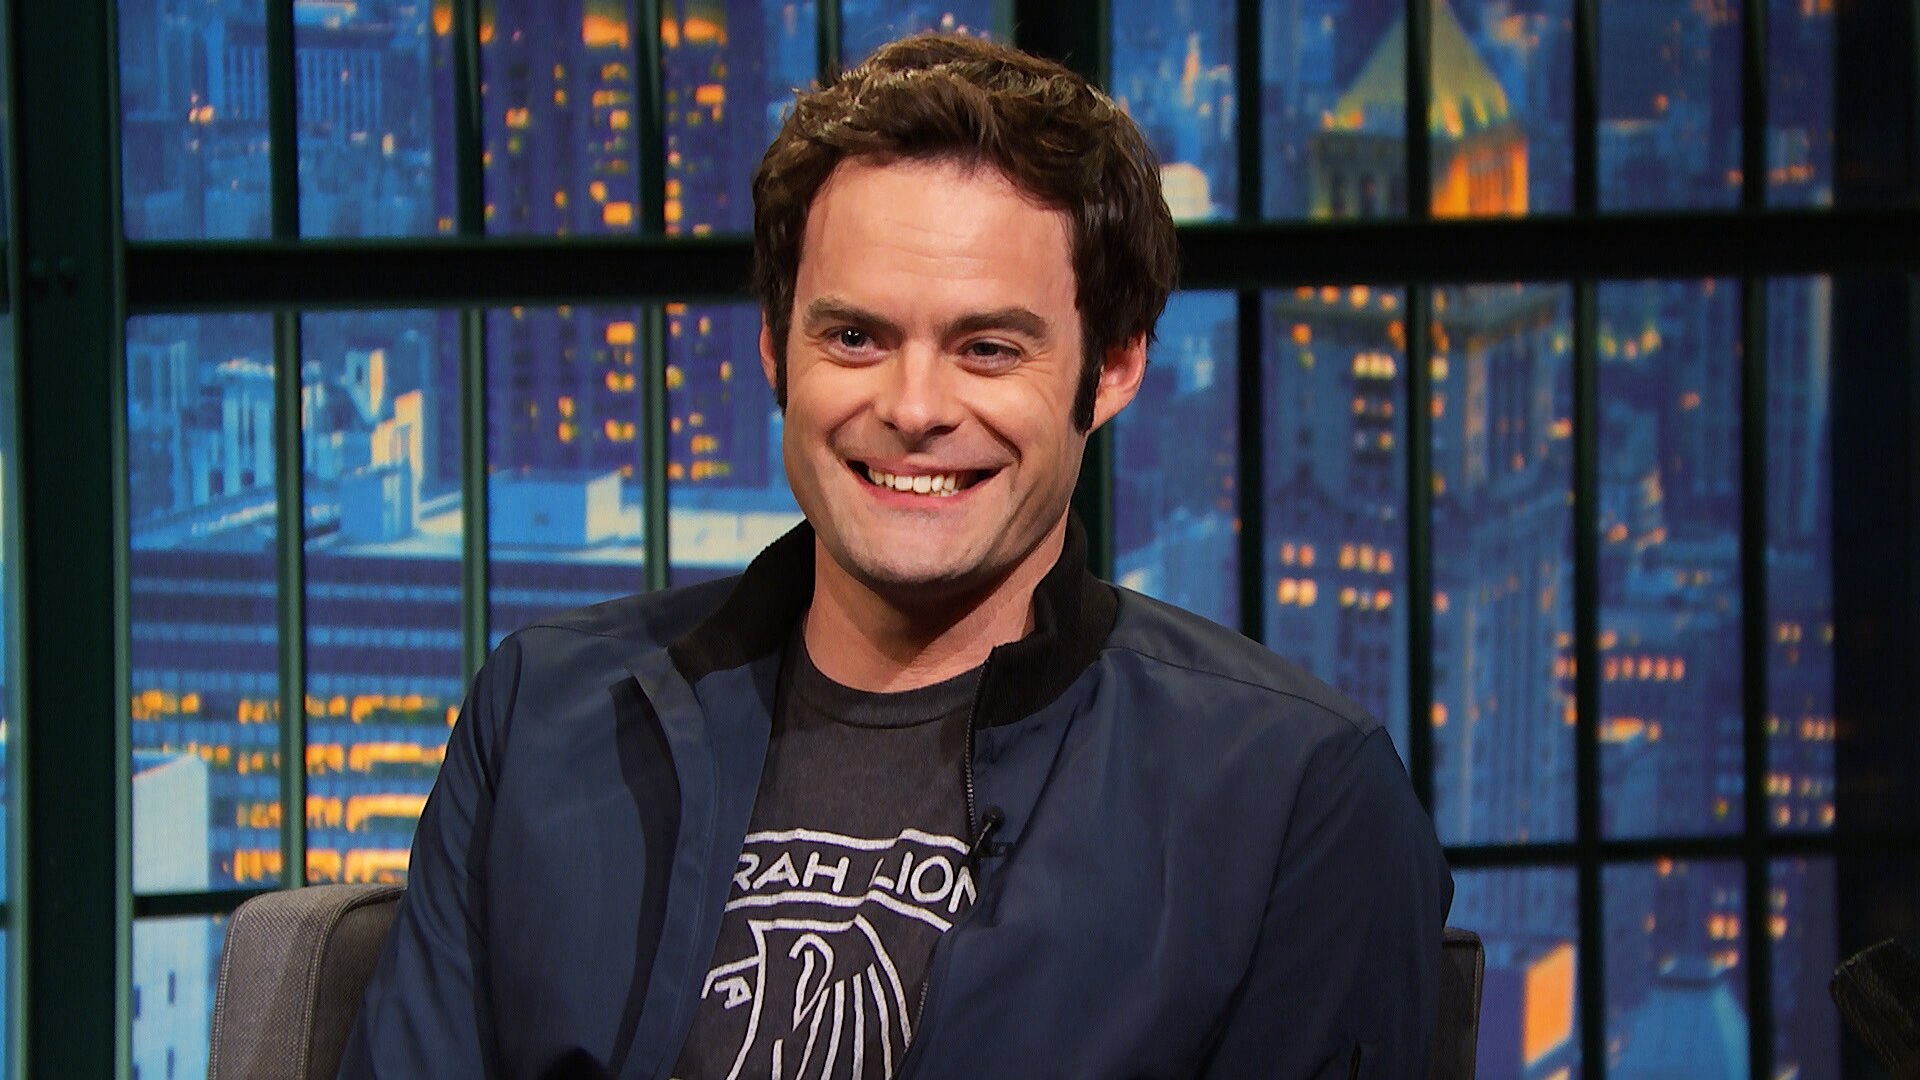 Bill Hader's Impression That Never Made SNL.